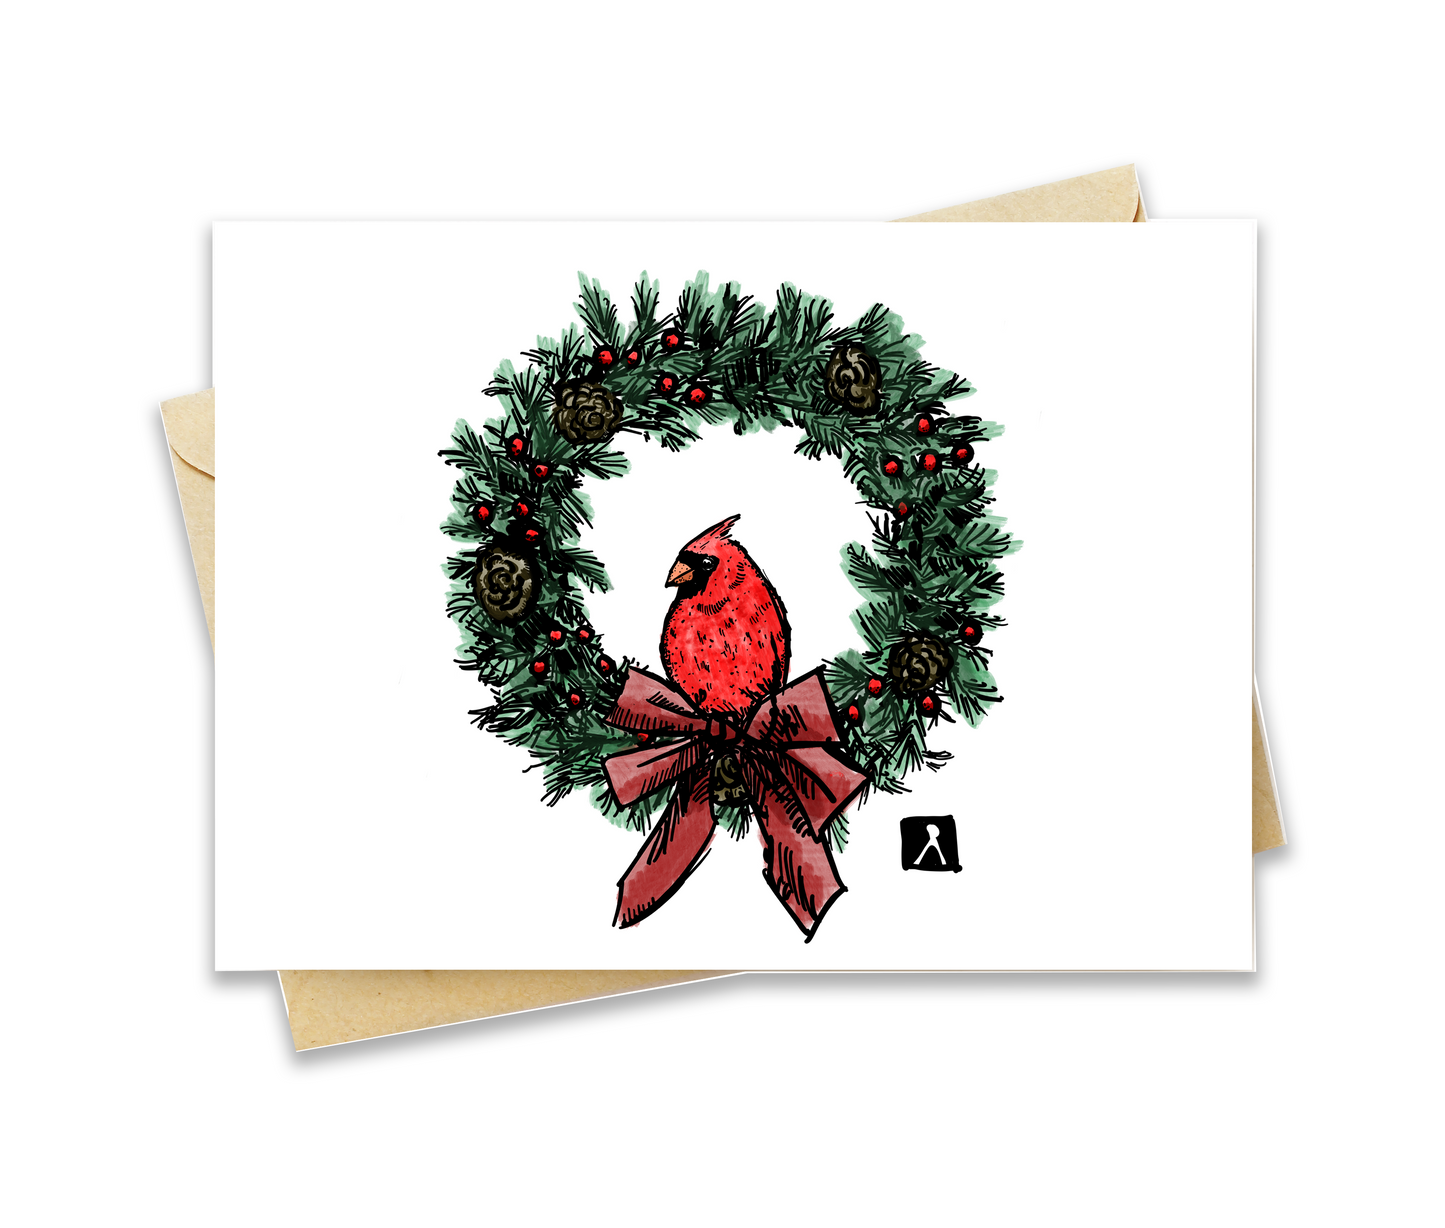 BellavanceInk: Christmas Card With Cardinal Resting In A Christmas Wreath Pen & Ink Watercolor Illustration 5 x 7 Inches